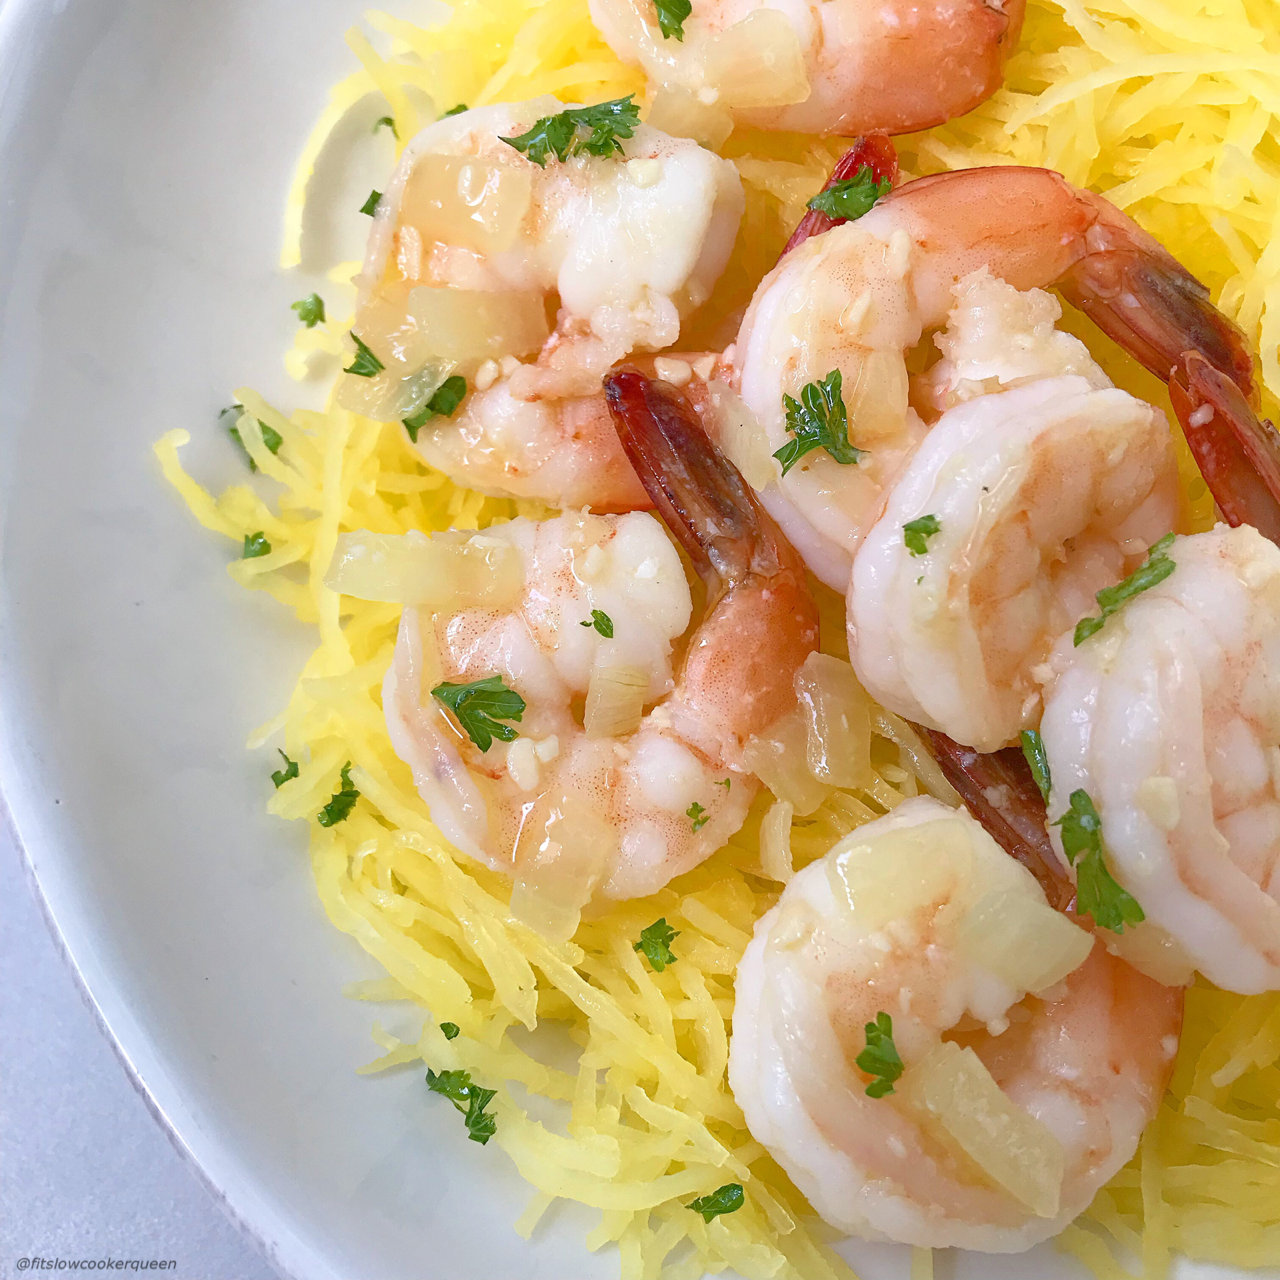 This low-carb shrimp scampi recipe is not just healthy being both paleo and whole30 too, it's done in less than 30 minutes!